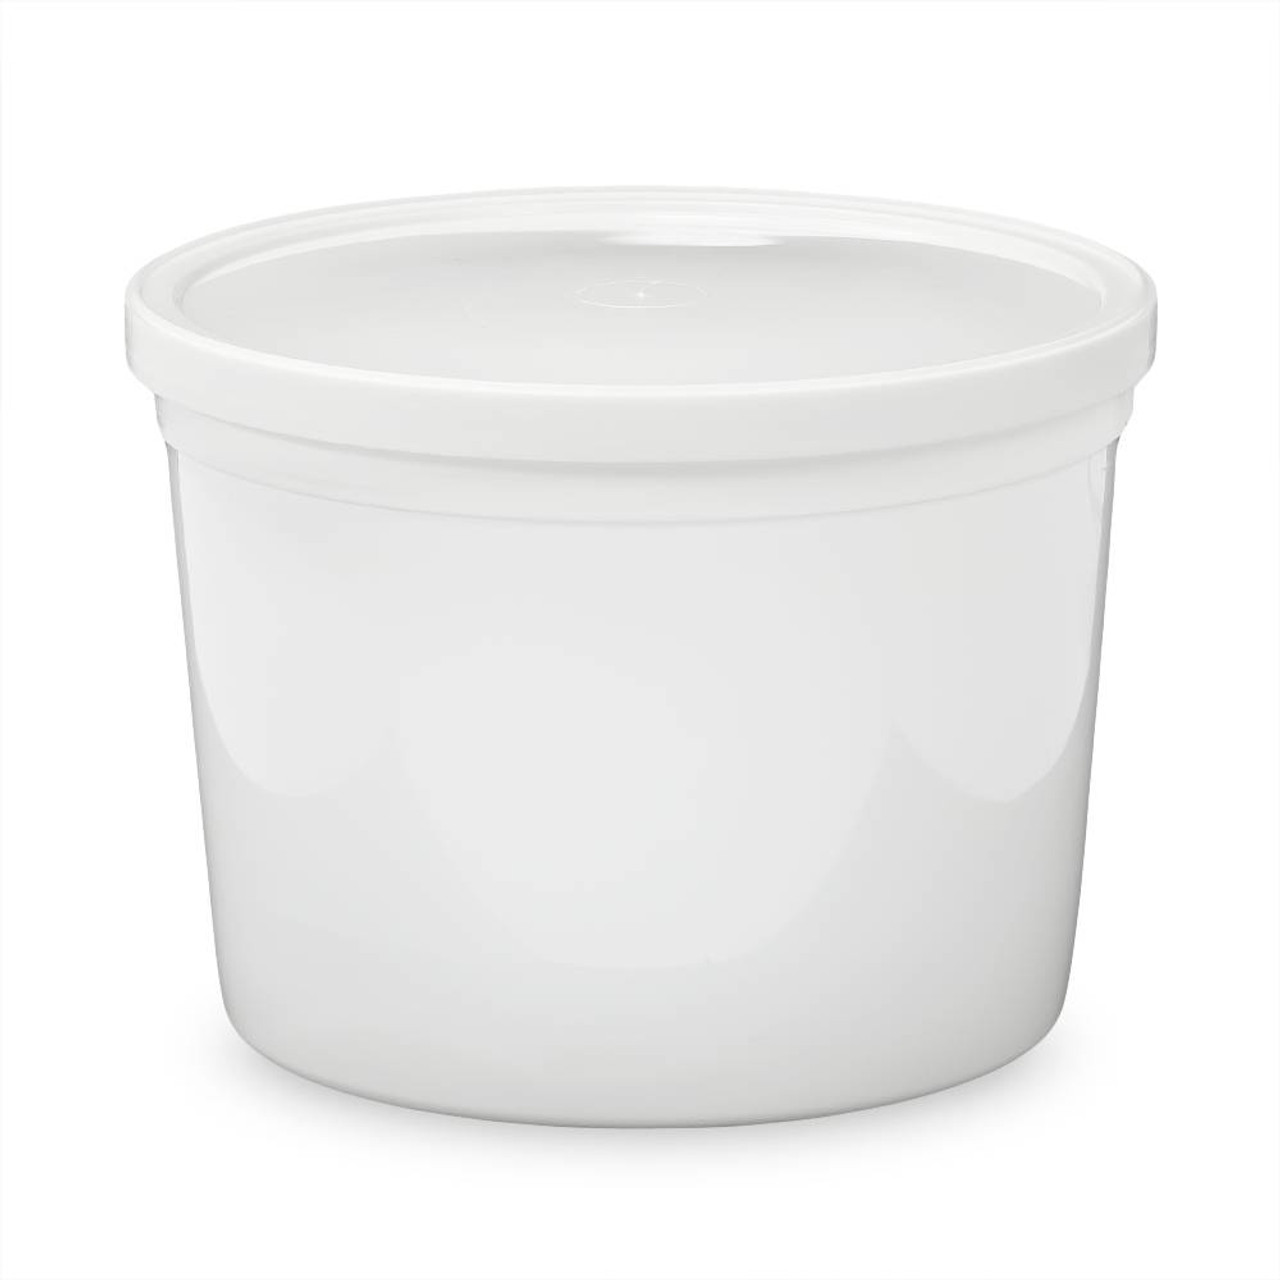 1 Gallon (128 oz) Clear Plastic Bucket with Lid and Handle (30 Pack), Ice Cream Tub with Lids - Food Grade Freezer and Microwave Safe Food Storage